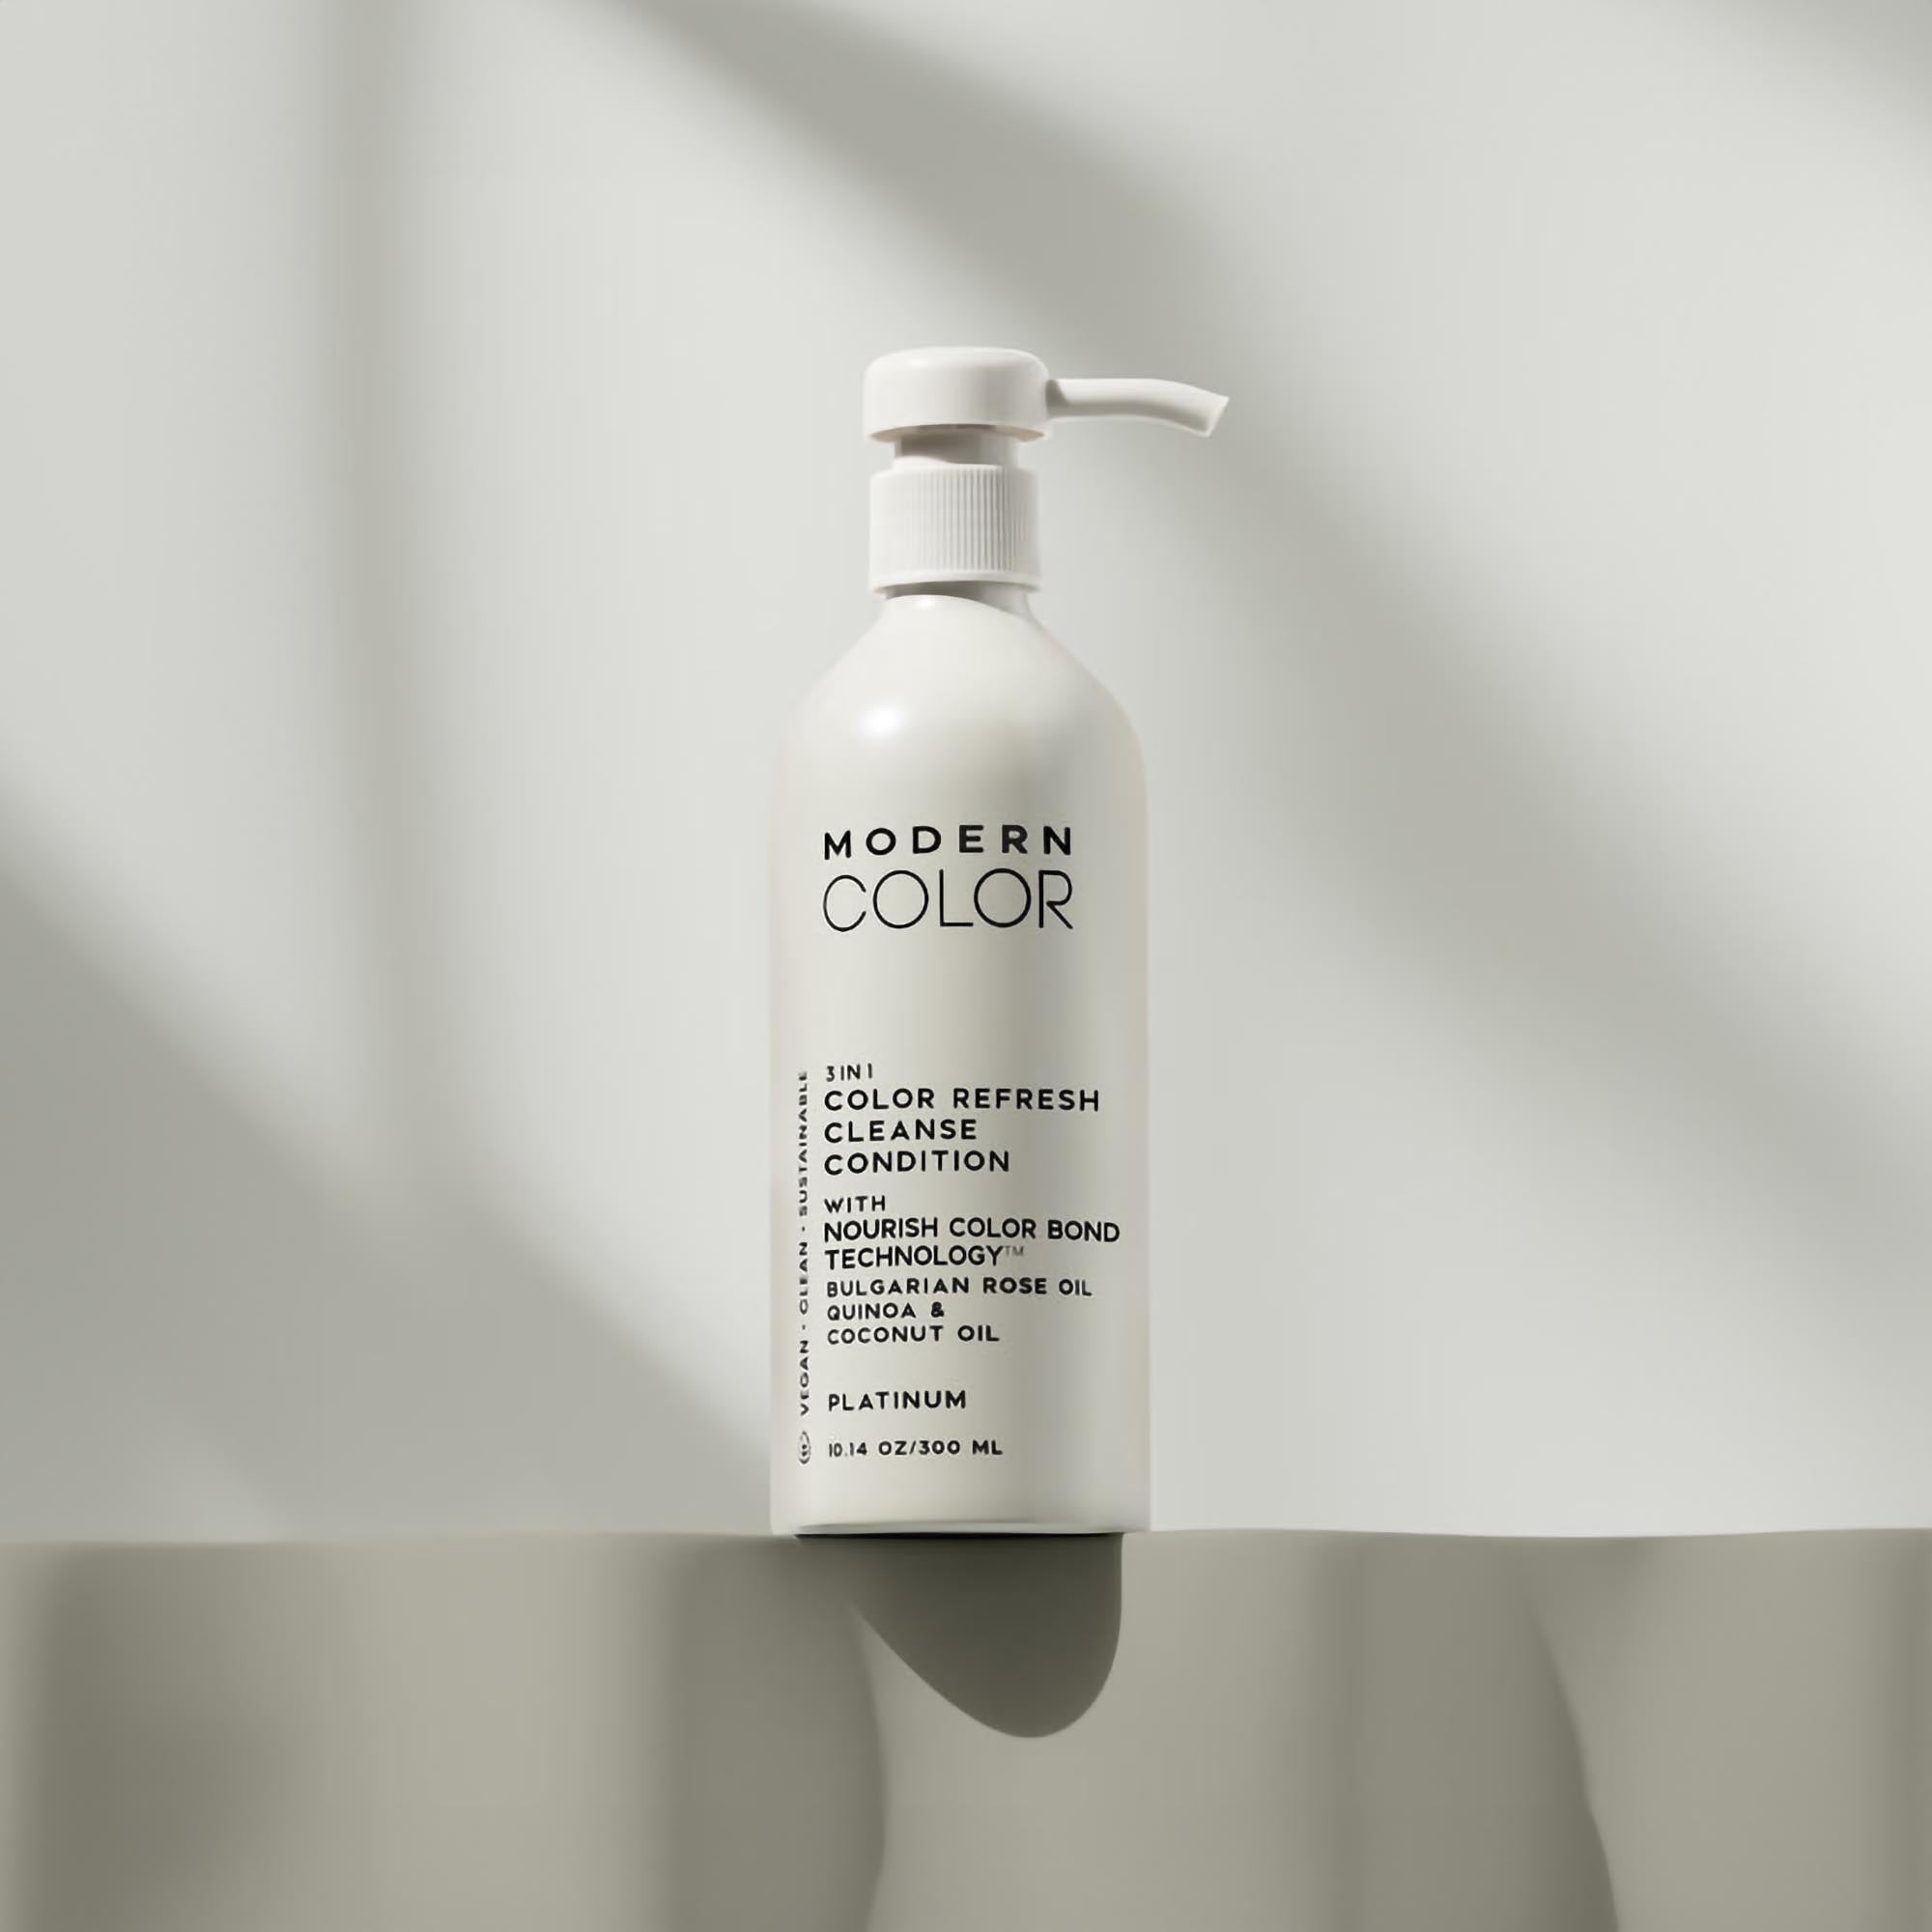 Modern Color 3-in-1 Color Refresh Cleanse Condition - Platinum / PLATINUM